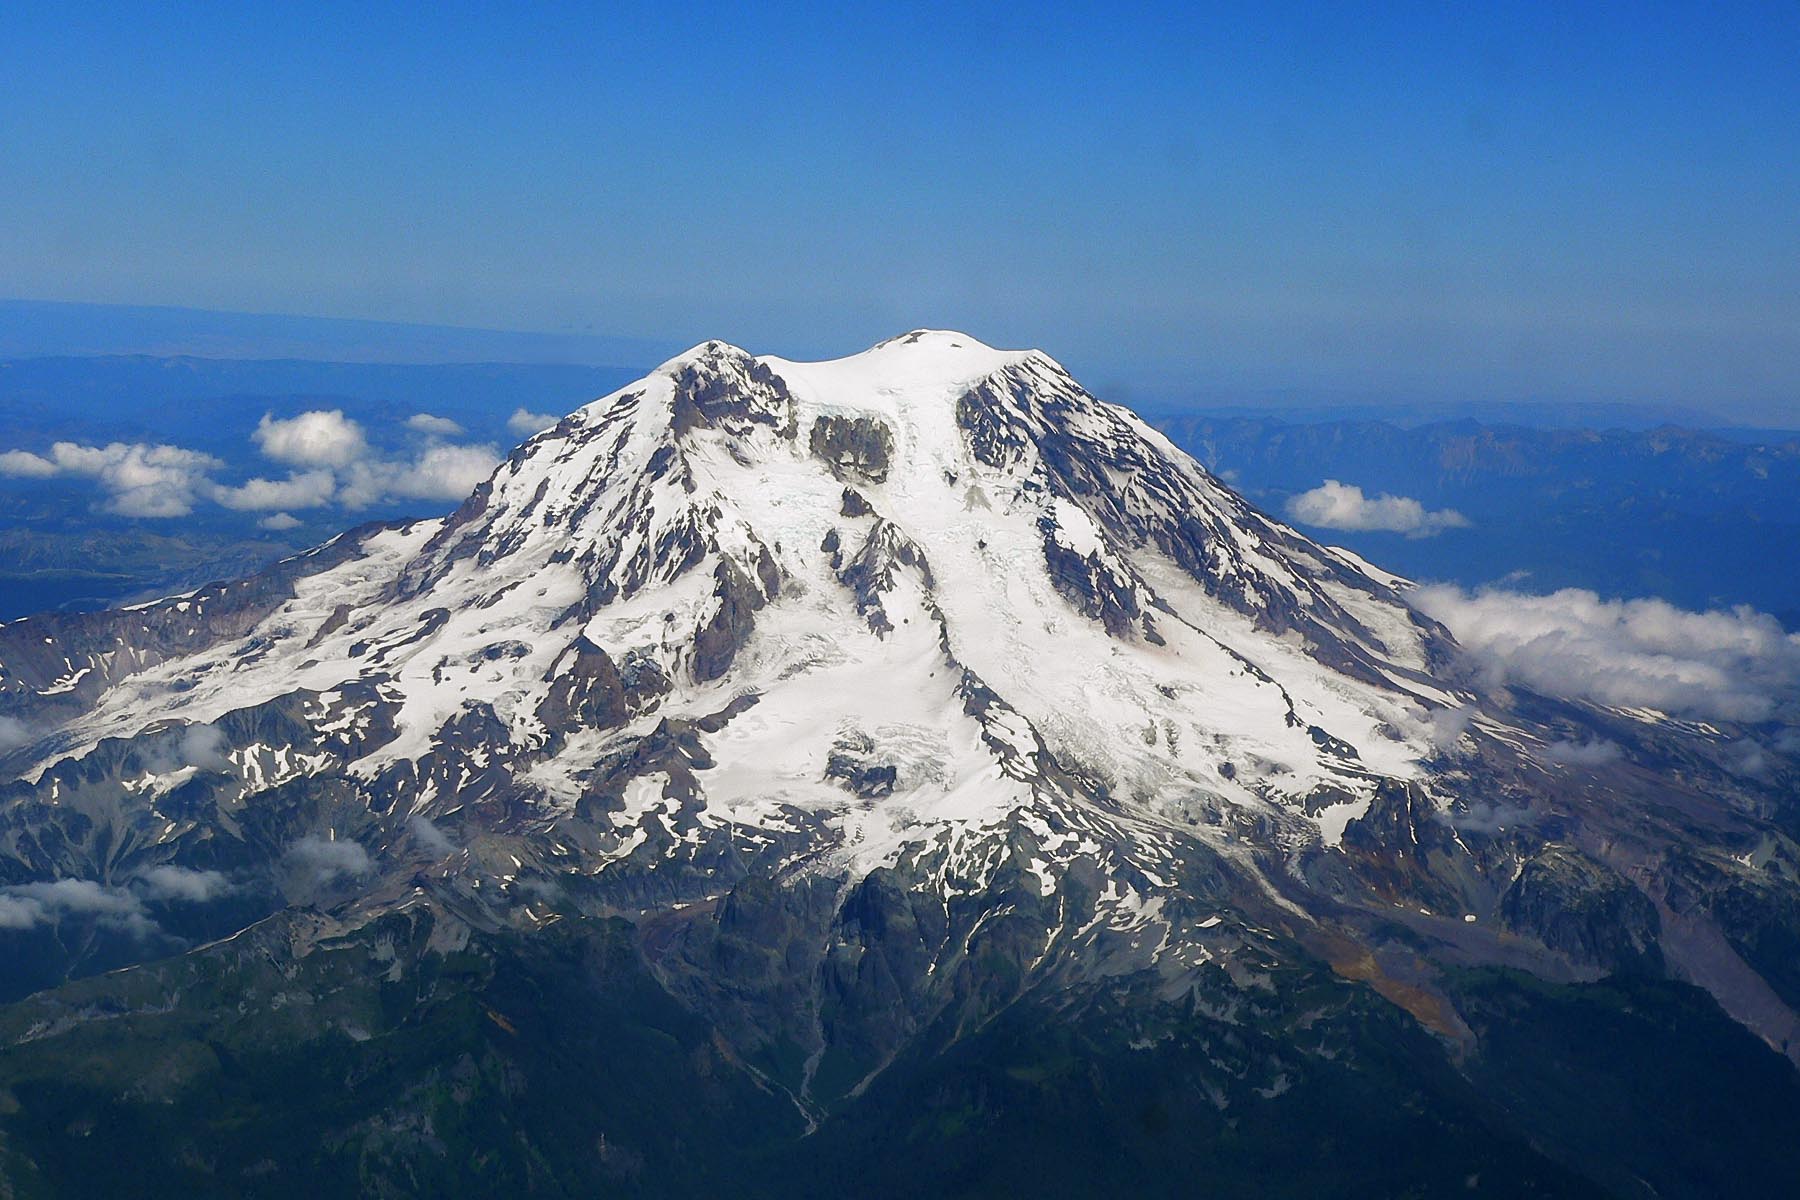 Mount Rainier from the West